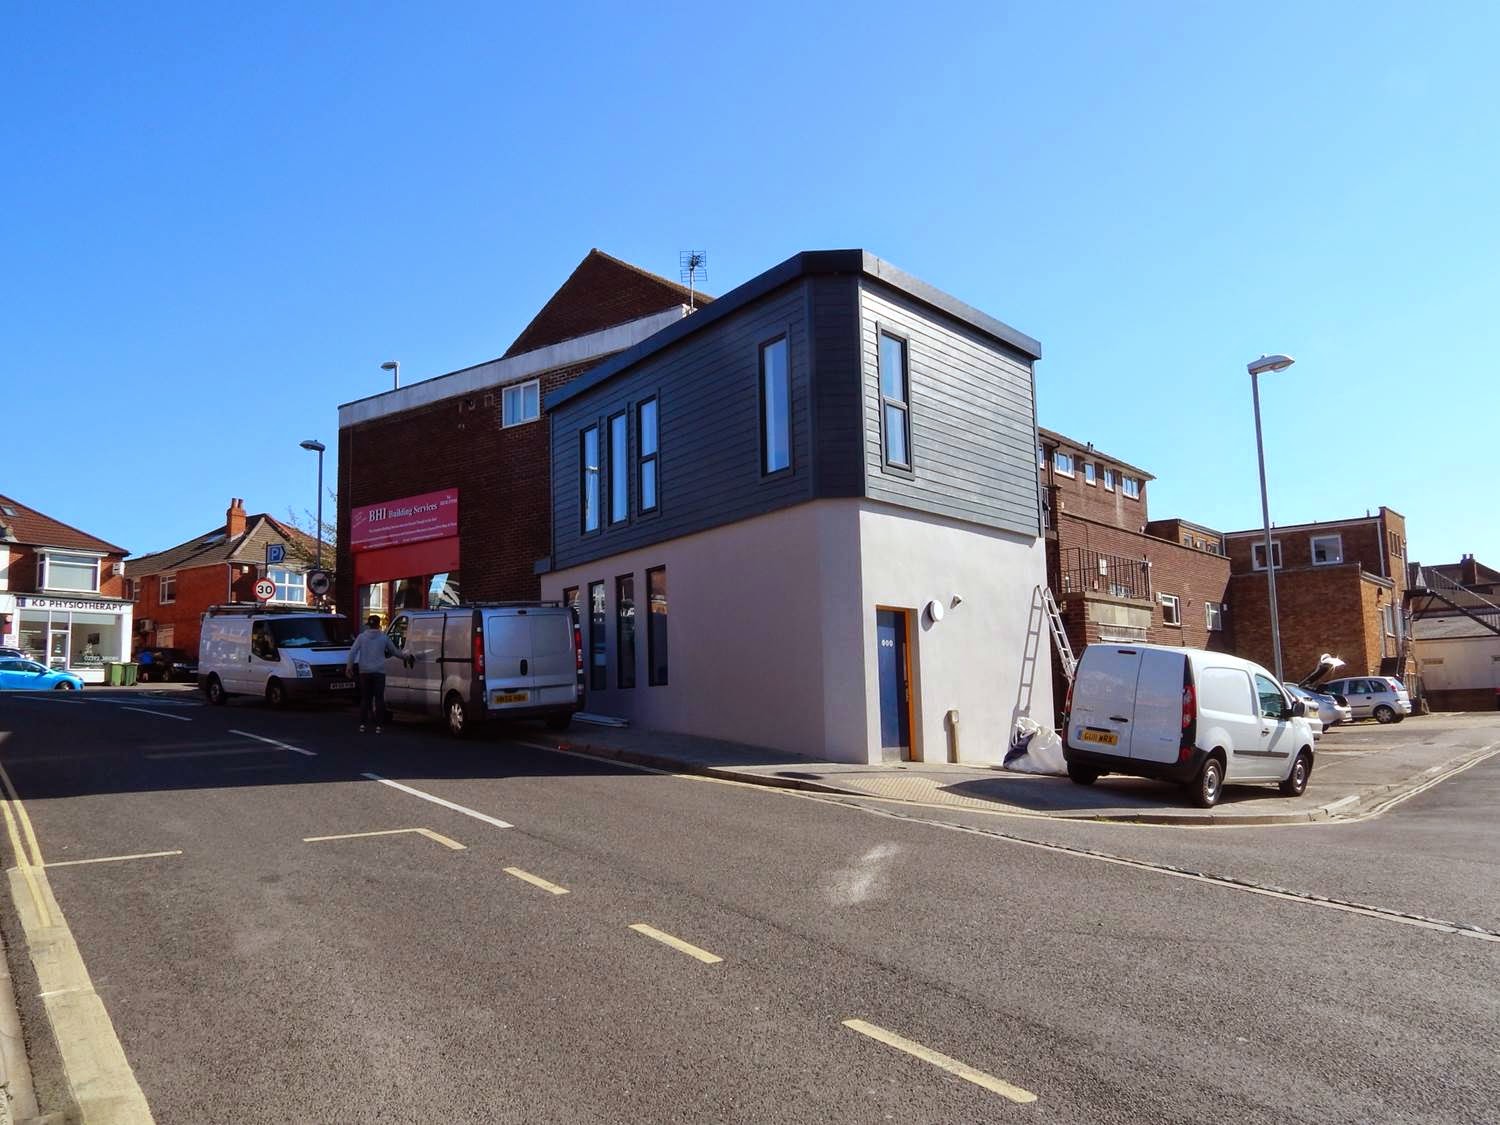 It is now a bijou officewith an added floor and spiral staircase  for a Cosham Estate Agent